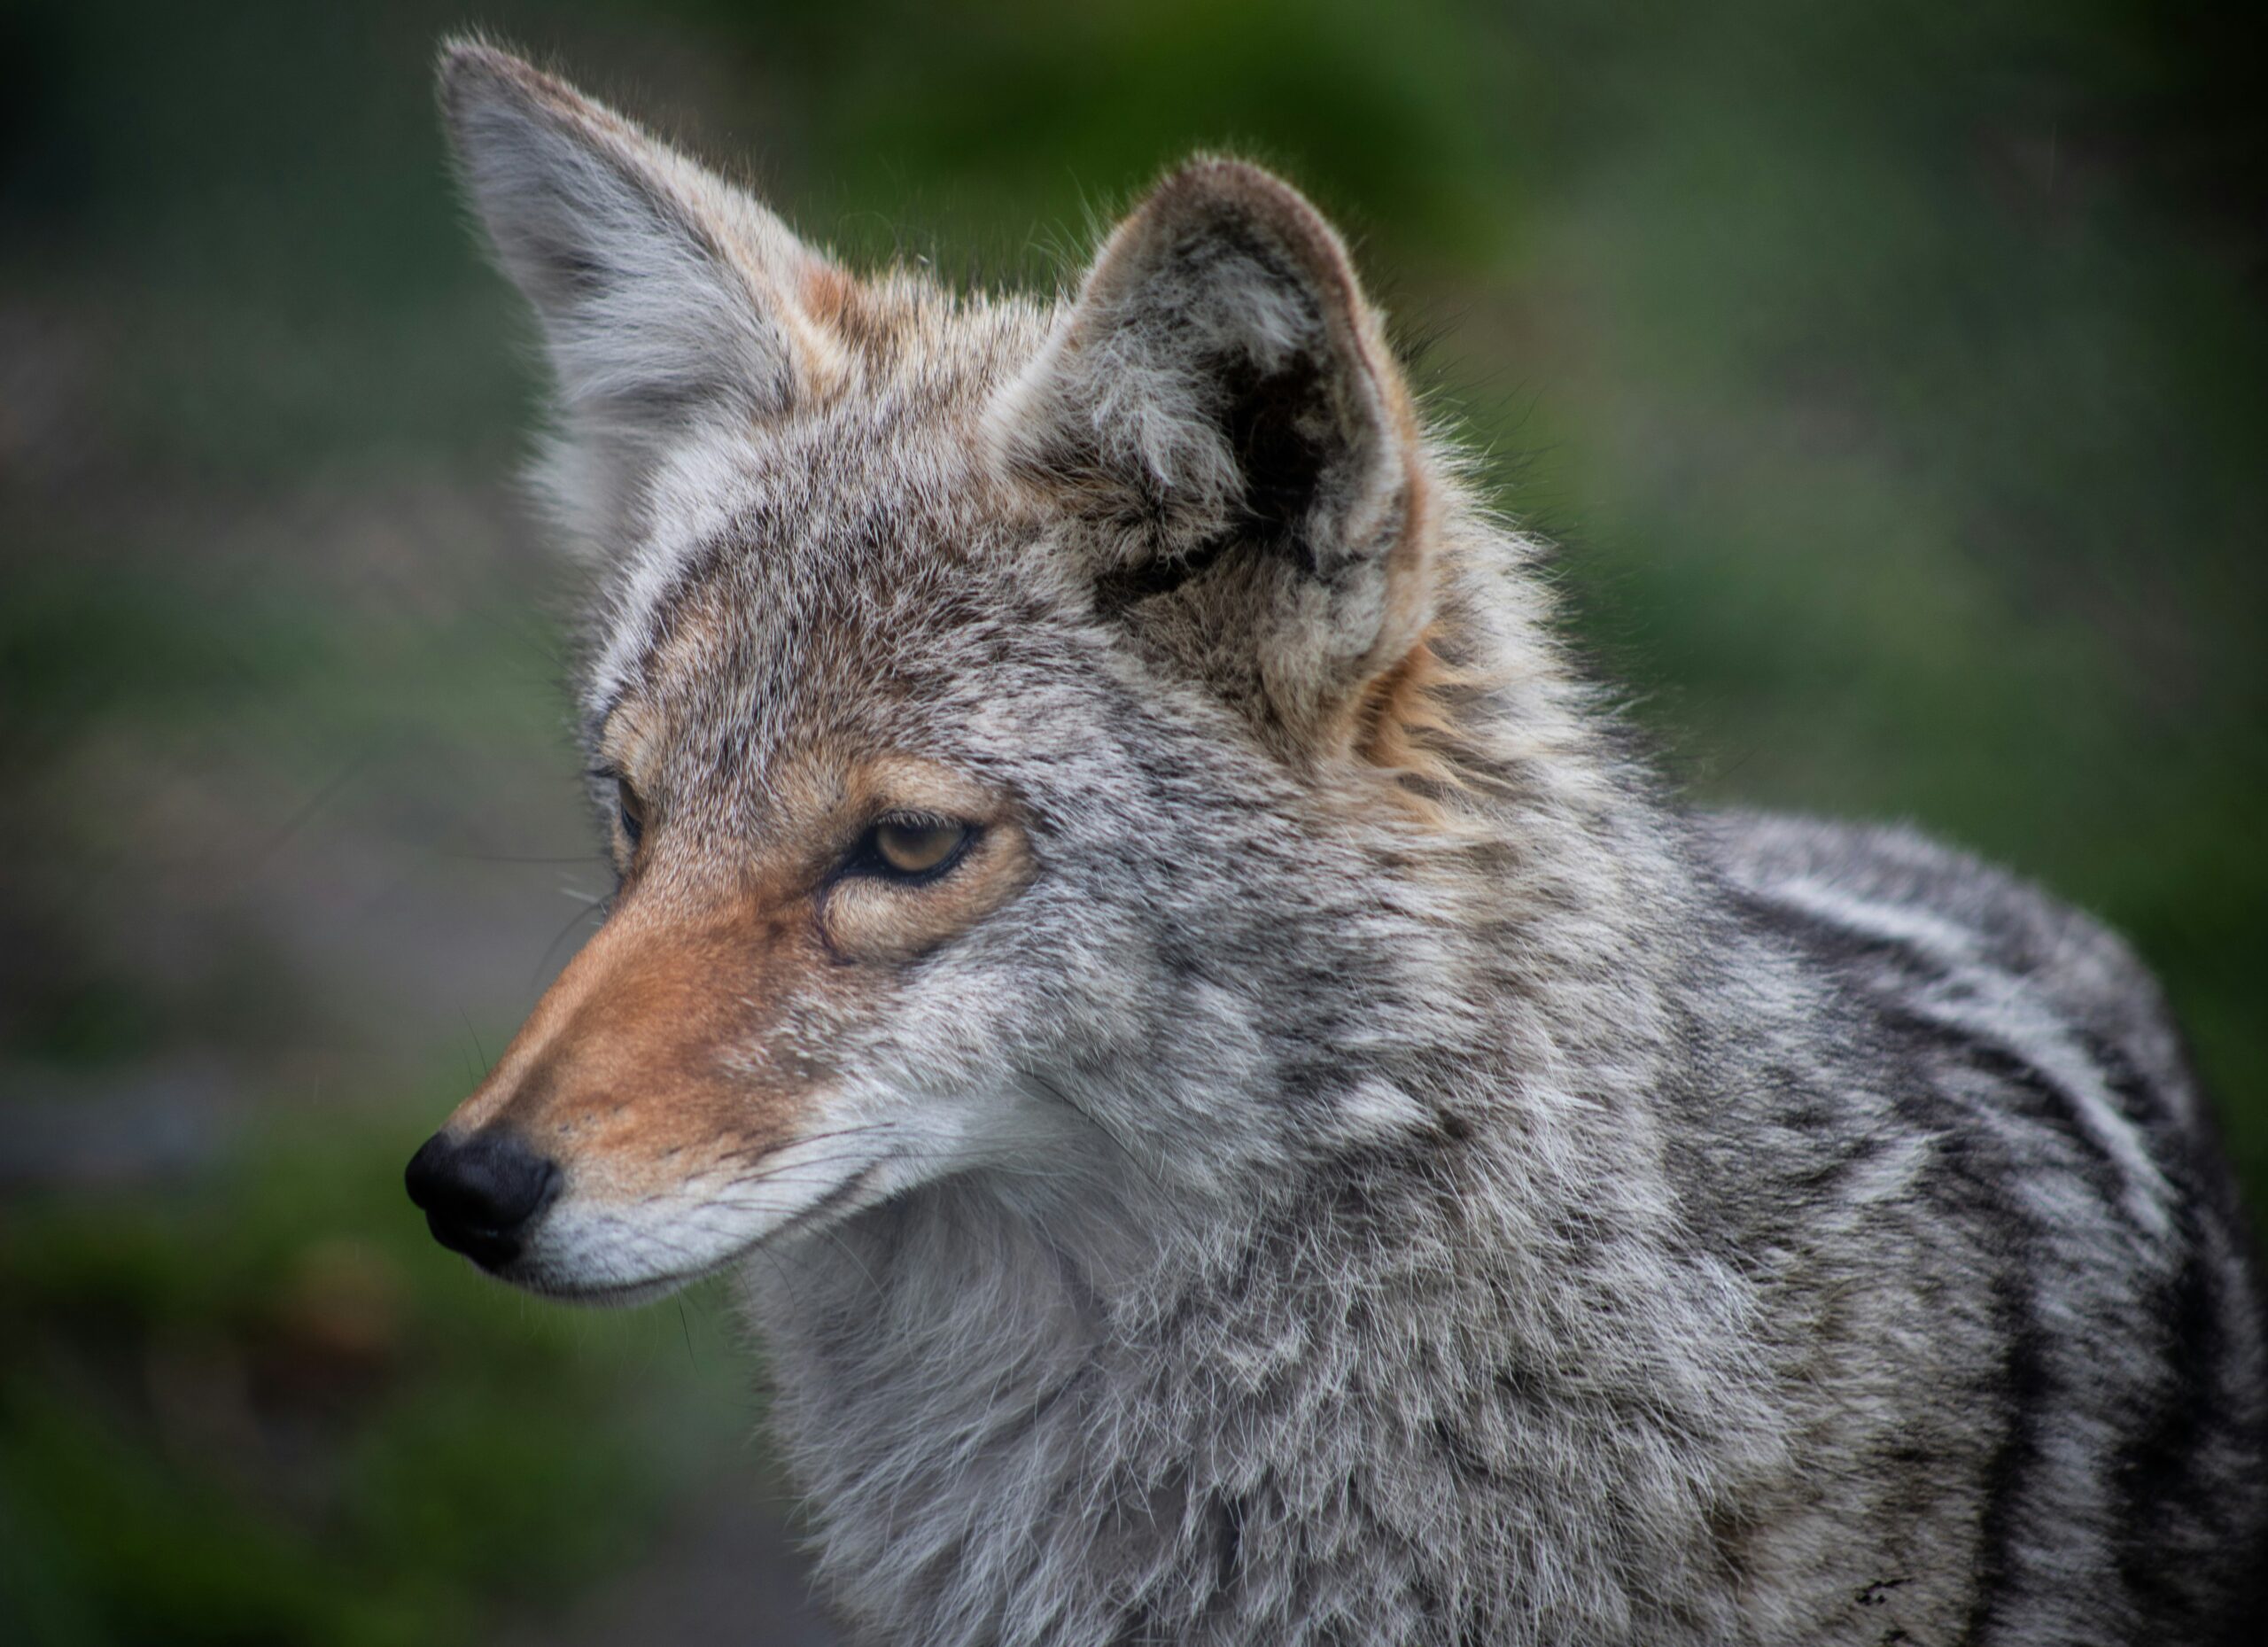 Wolf vs Coyote: Differences and Similarities